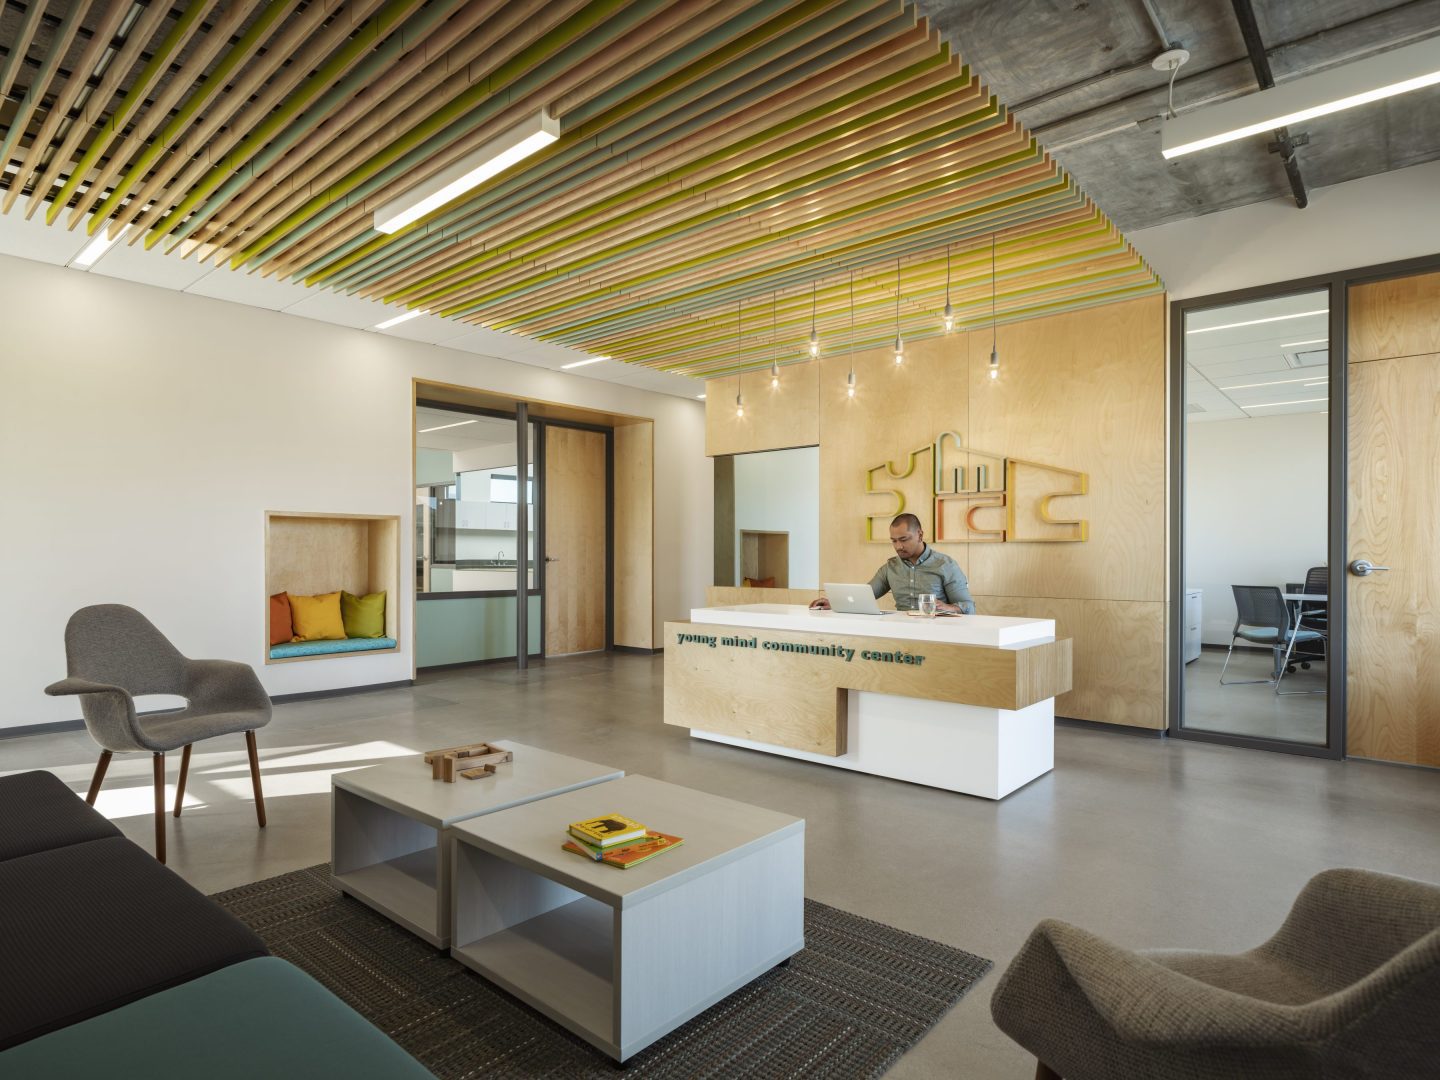 The colorful interior reception area of the Young Mind Center in Phoenix, Arizona.